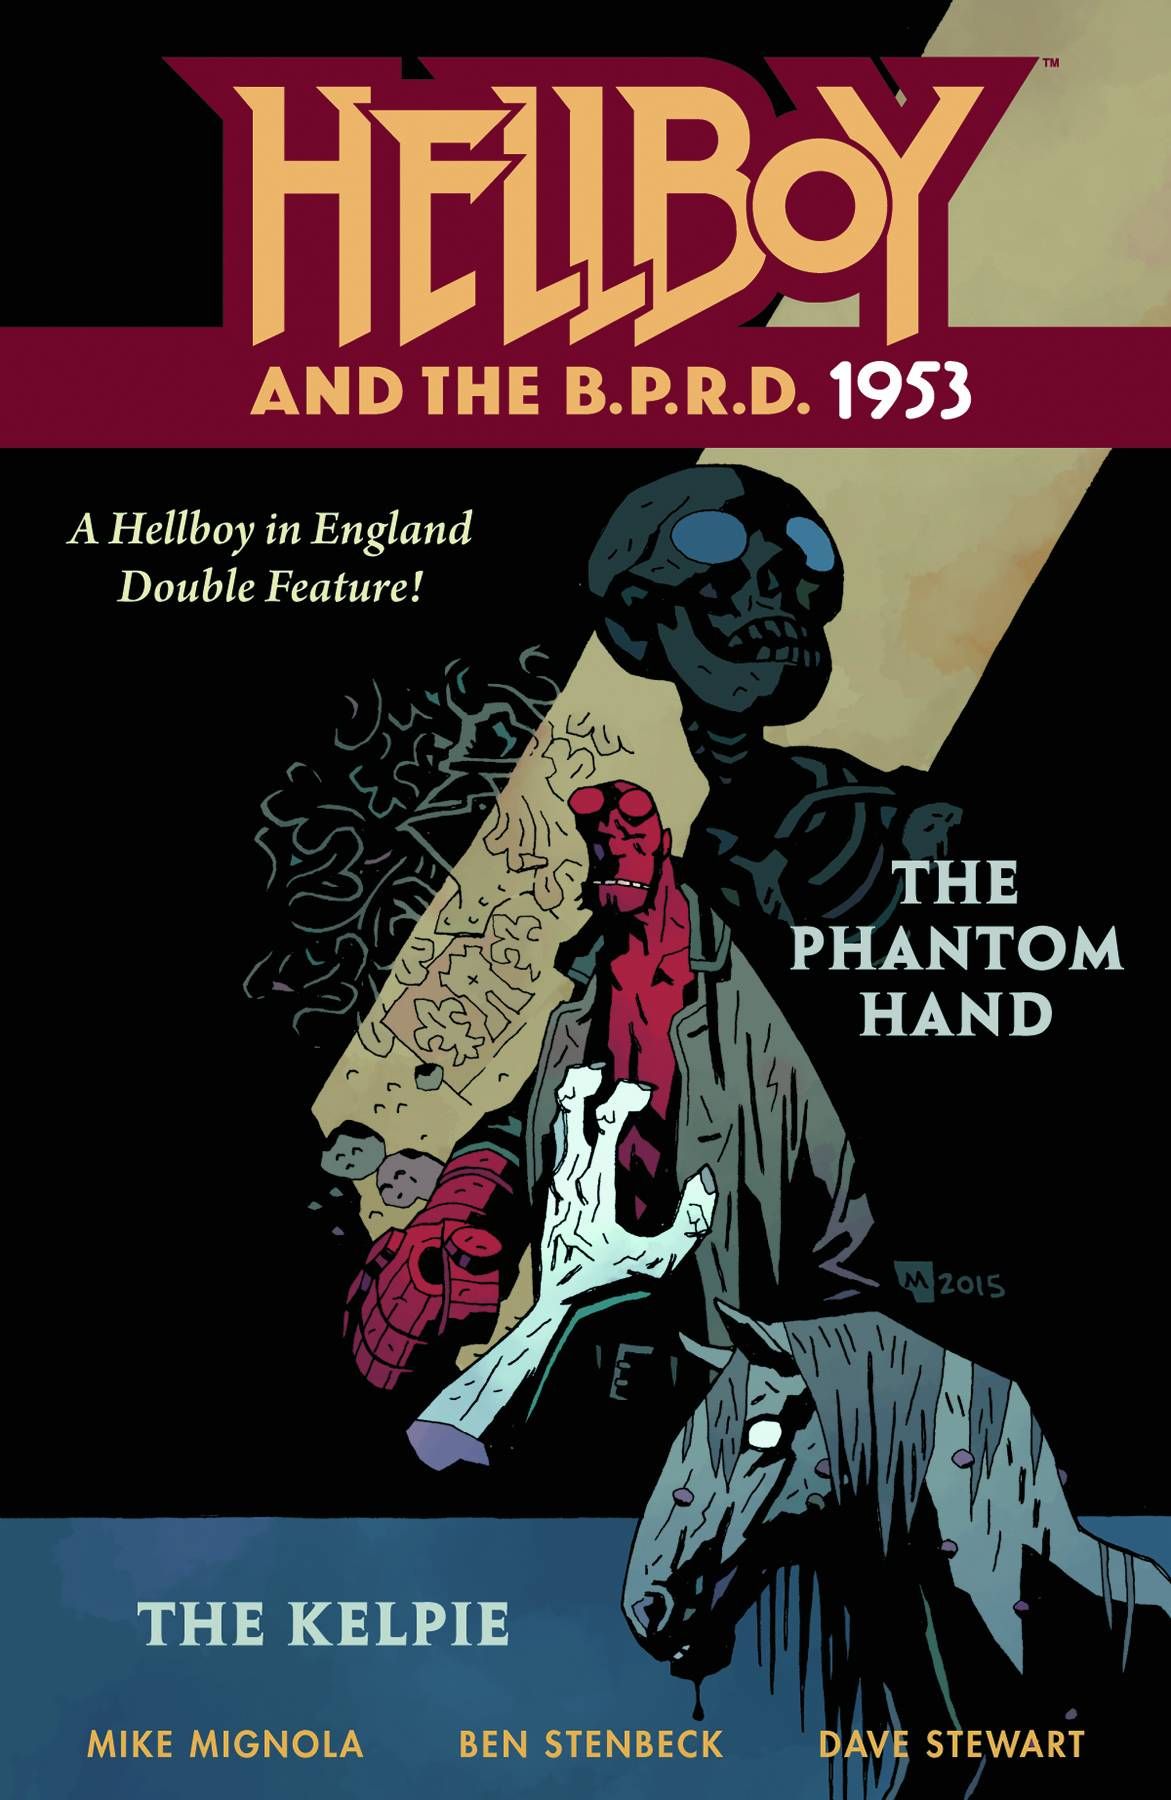 Hellboy and the B.P.R.D. 1953 #1 Comic